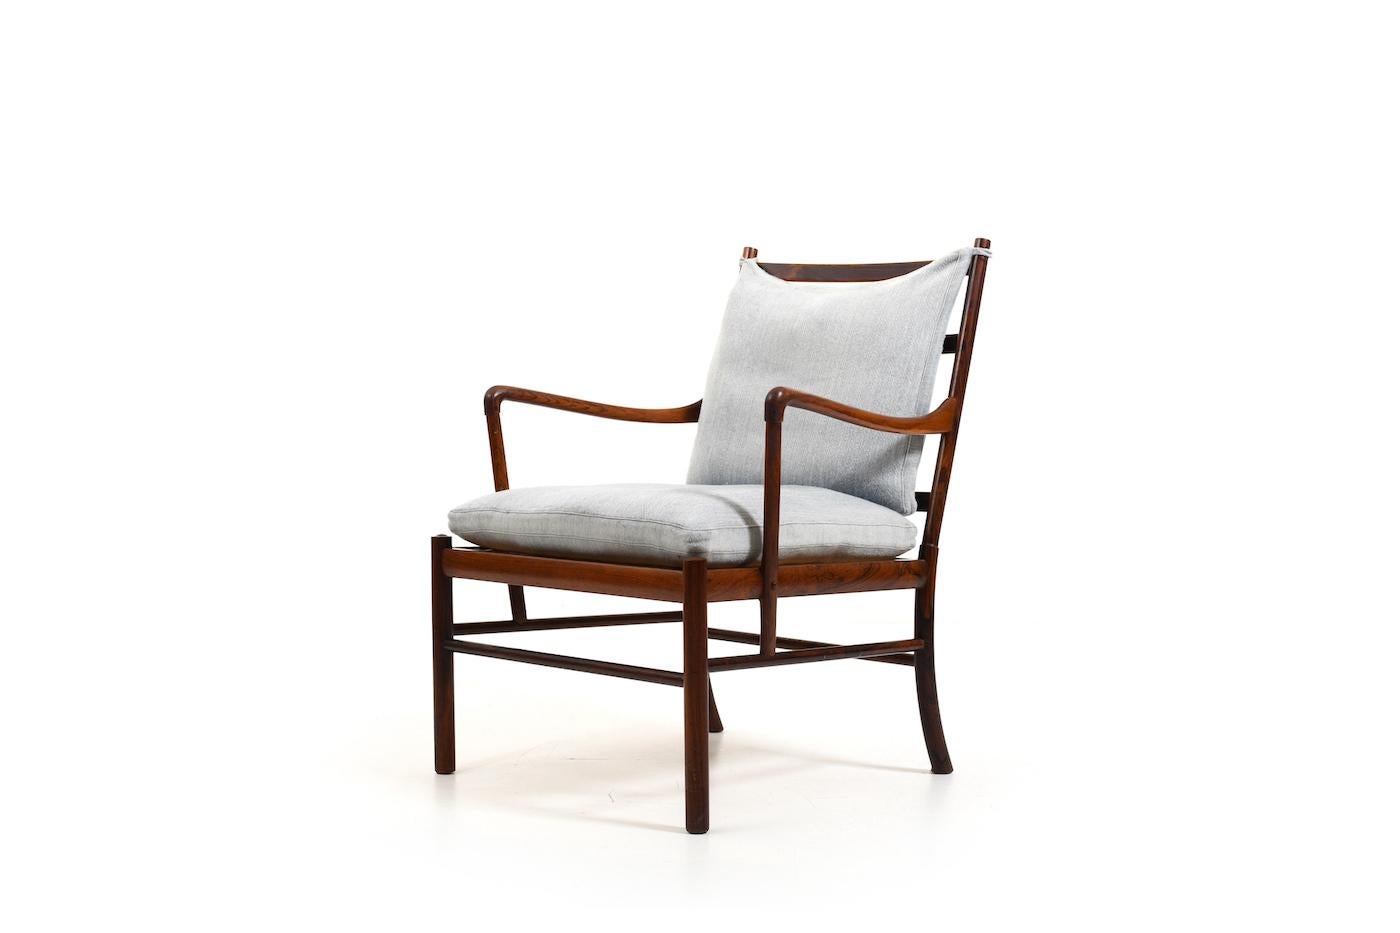 Danish Vintage PJ-149 Colonial Chair by Ole Wanscher for P. Jeppesen 1949 For Sale